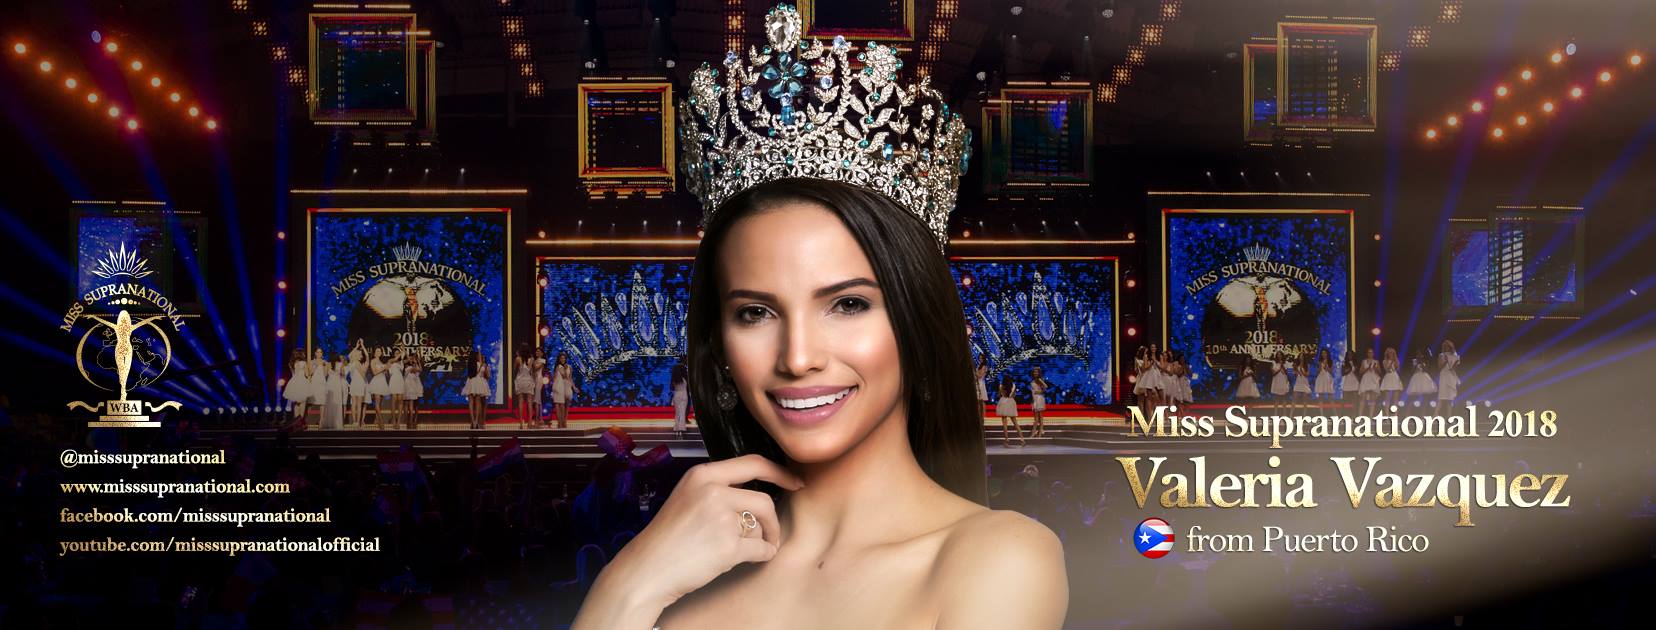 Watch Miss Supranational 2019 Live Miss Supranational Official Website 